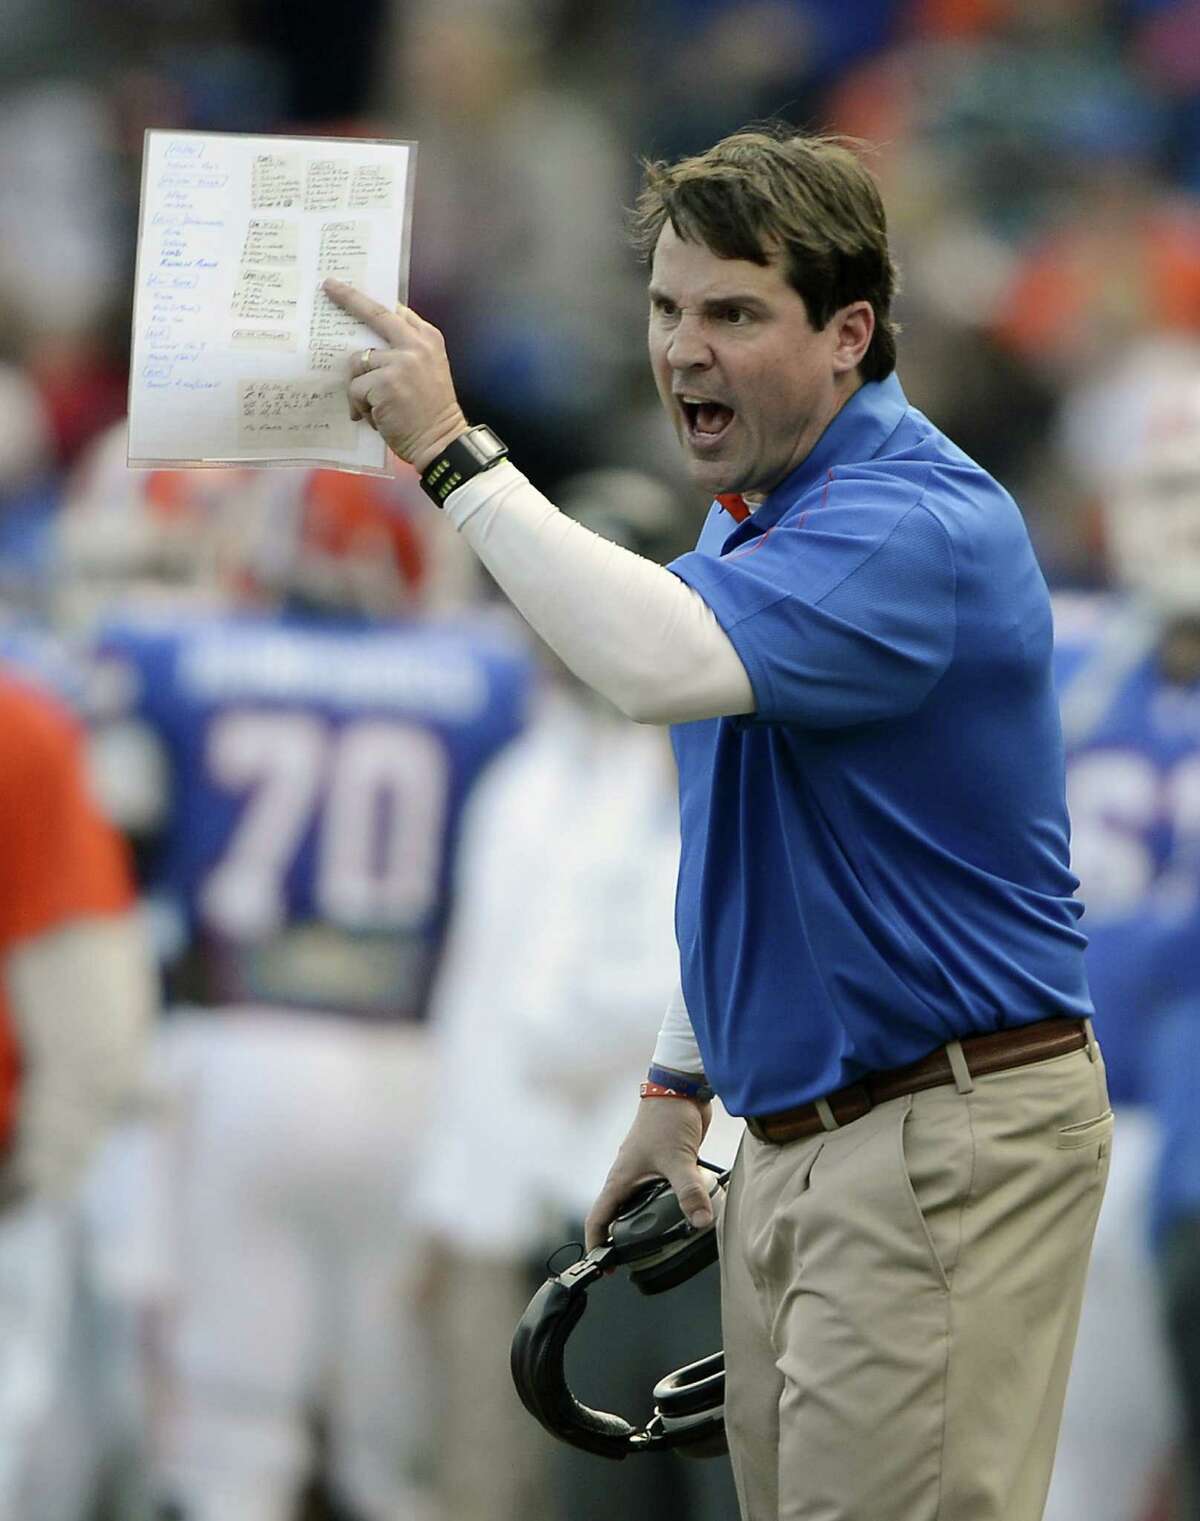 Will Muschamp, in his third season at Florida, has the Gators playing at an elite level again.